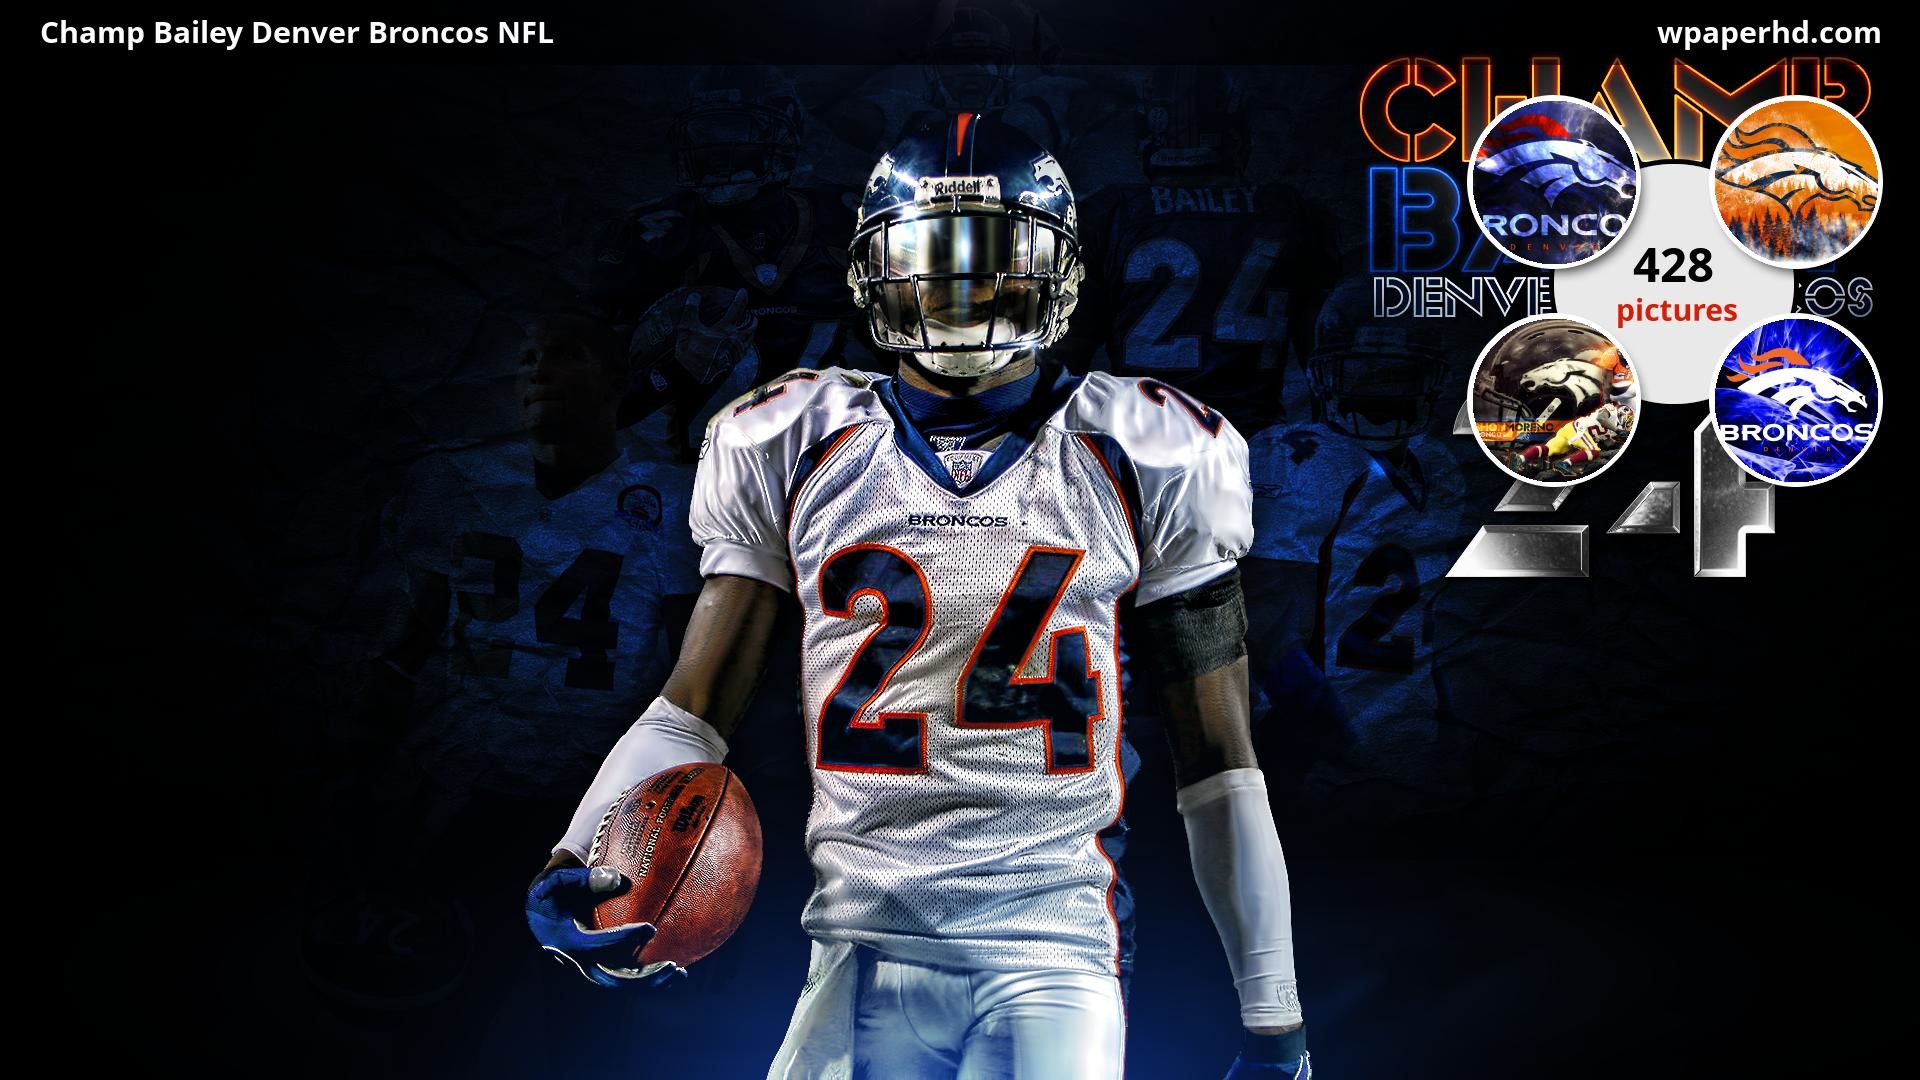 1920x1080 ... Denver Broncos NFL wallpaper, where you can download this picture in  Original size and ...